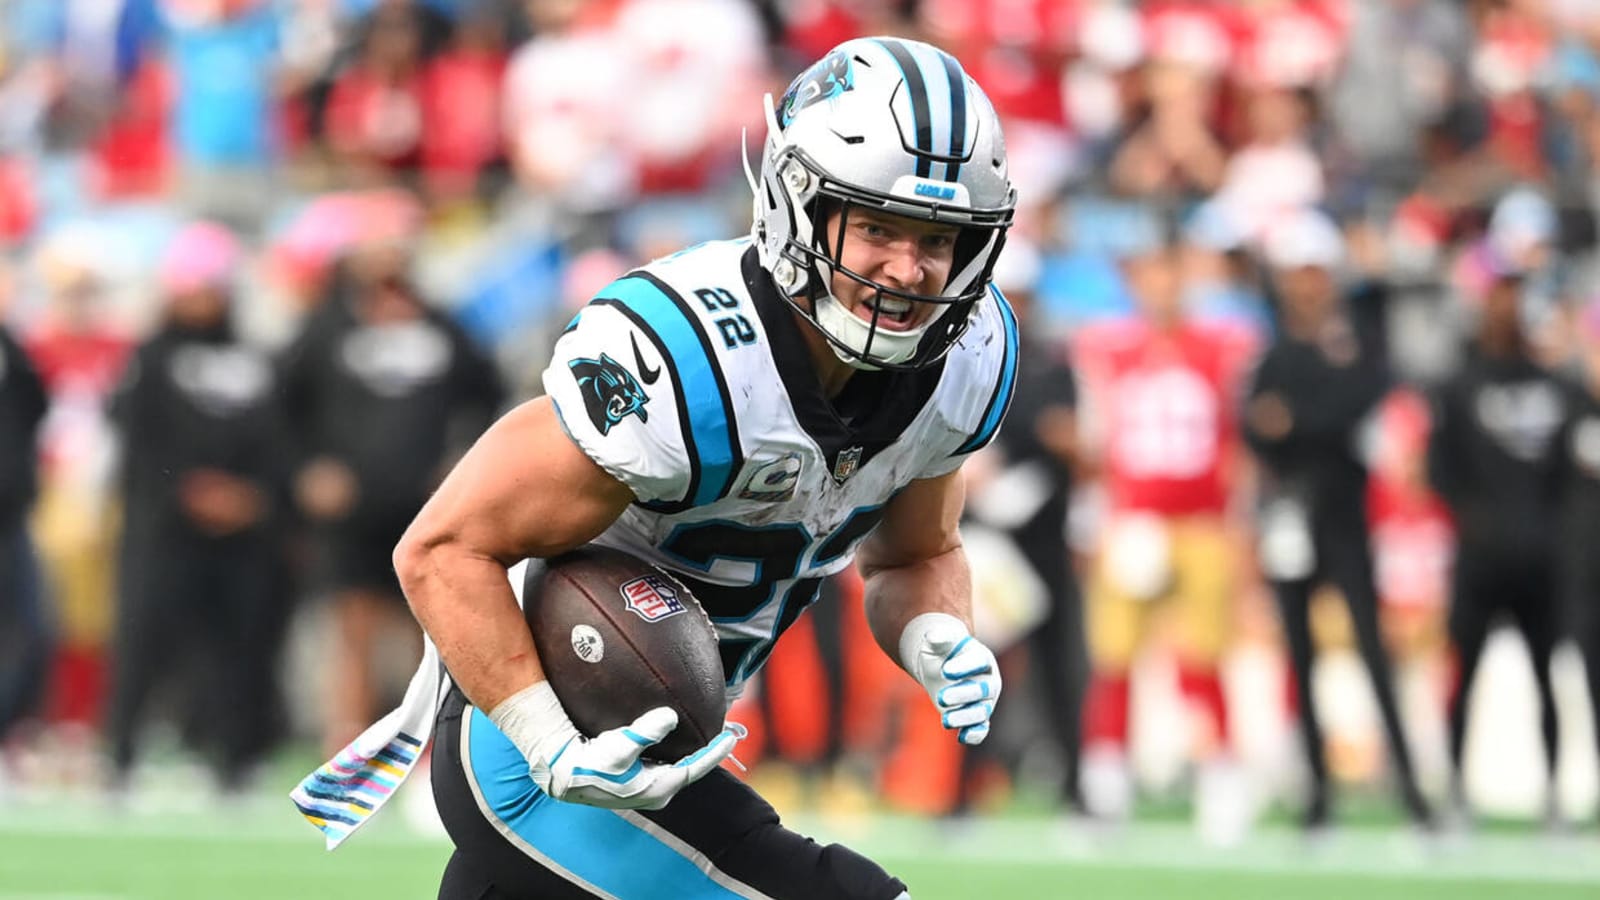 Source: Panthers would trade McCaffrey for right price